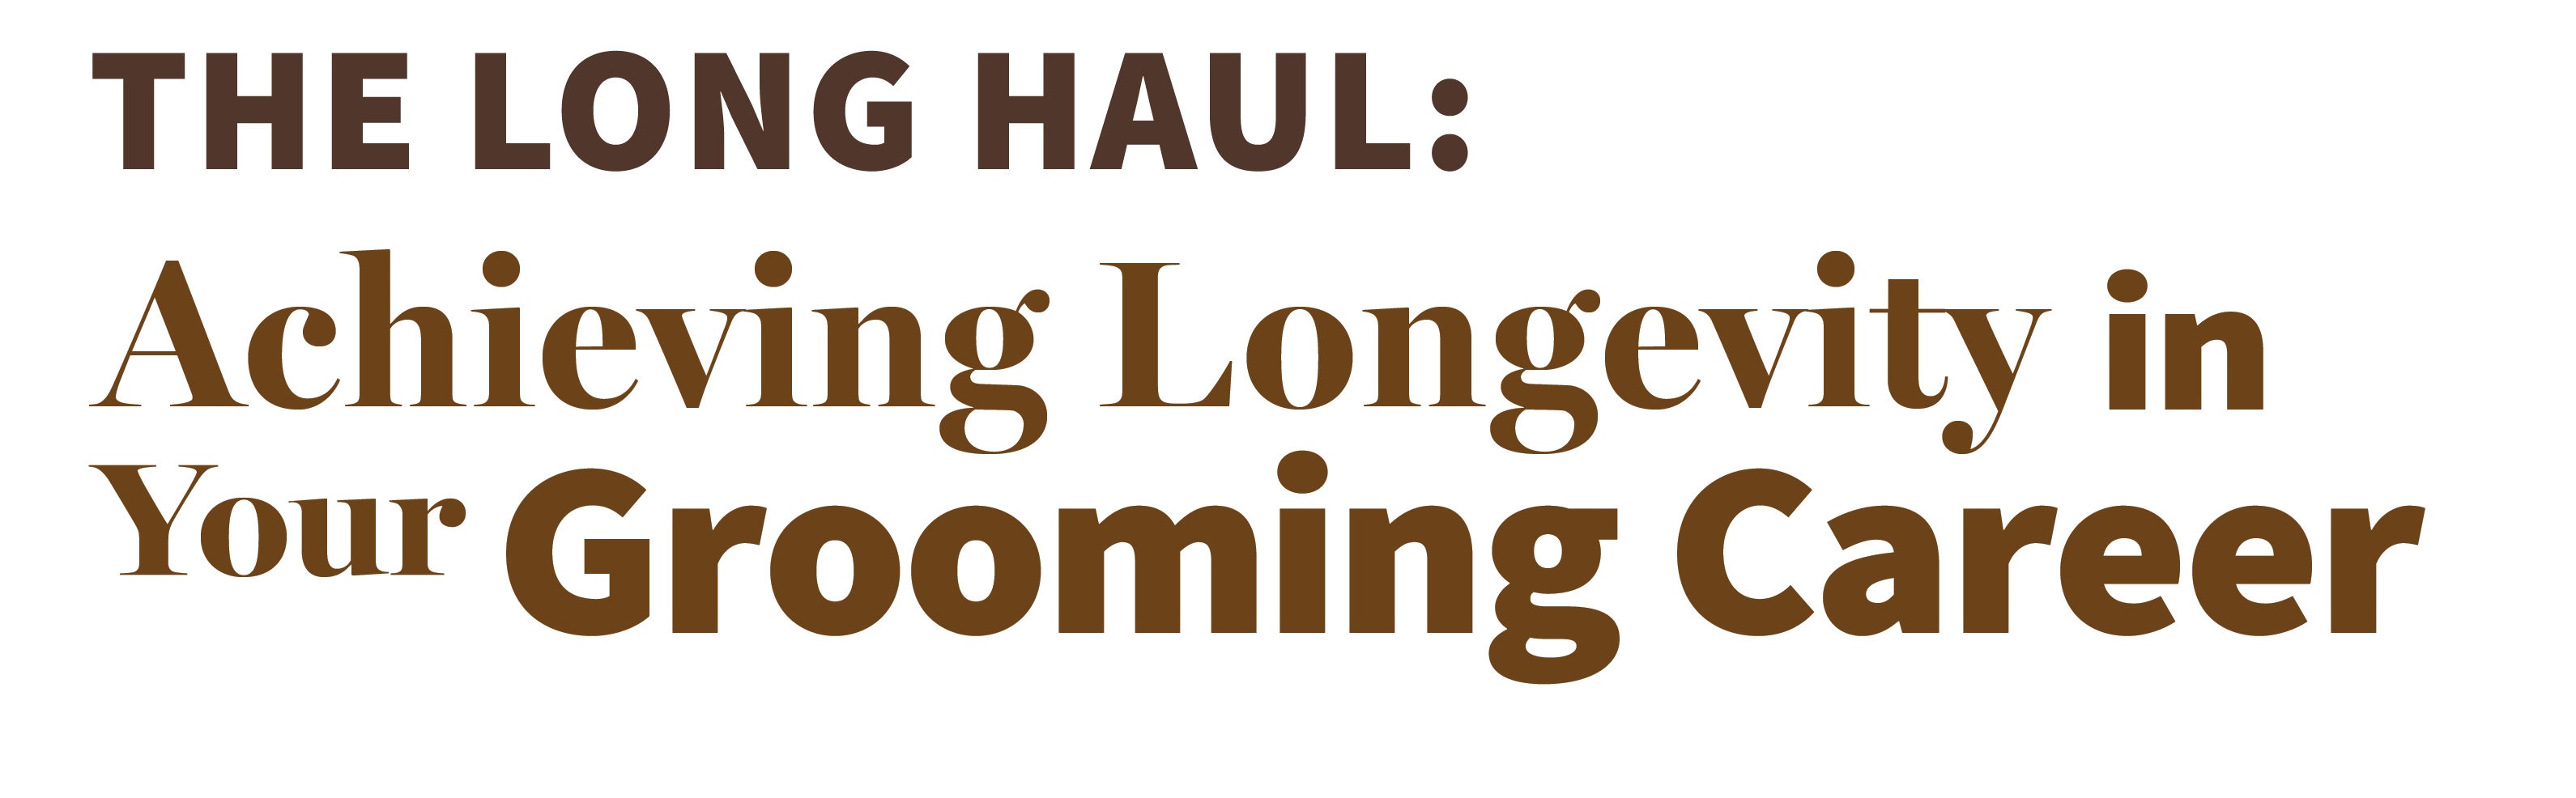 The Long Haul: Achieving Longevity in Your Grooming Career